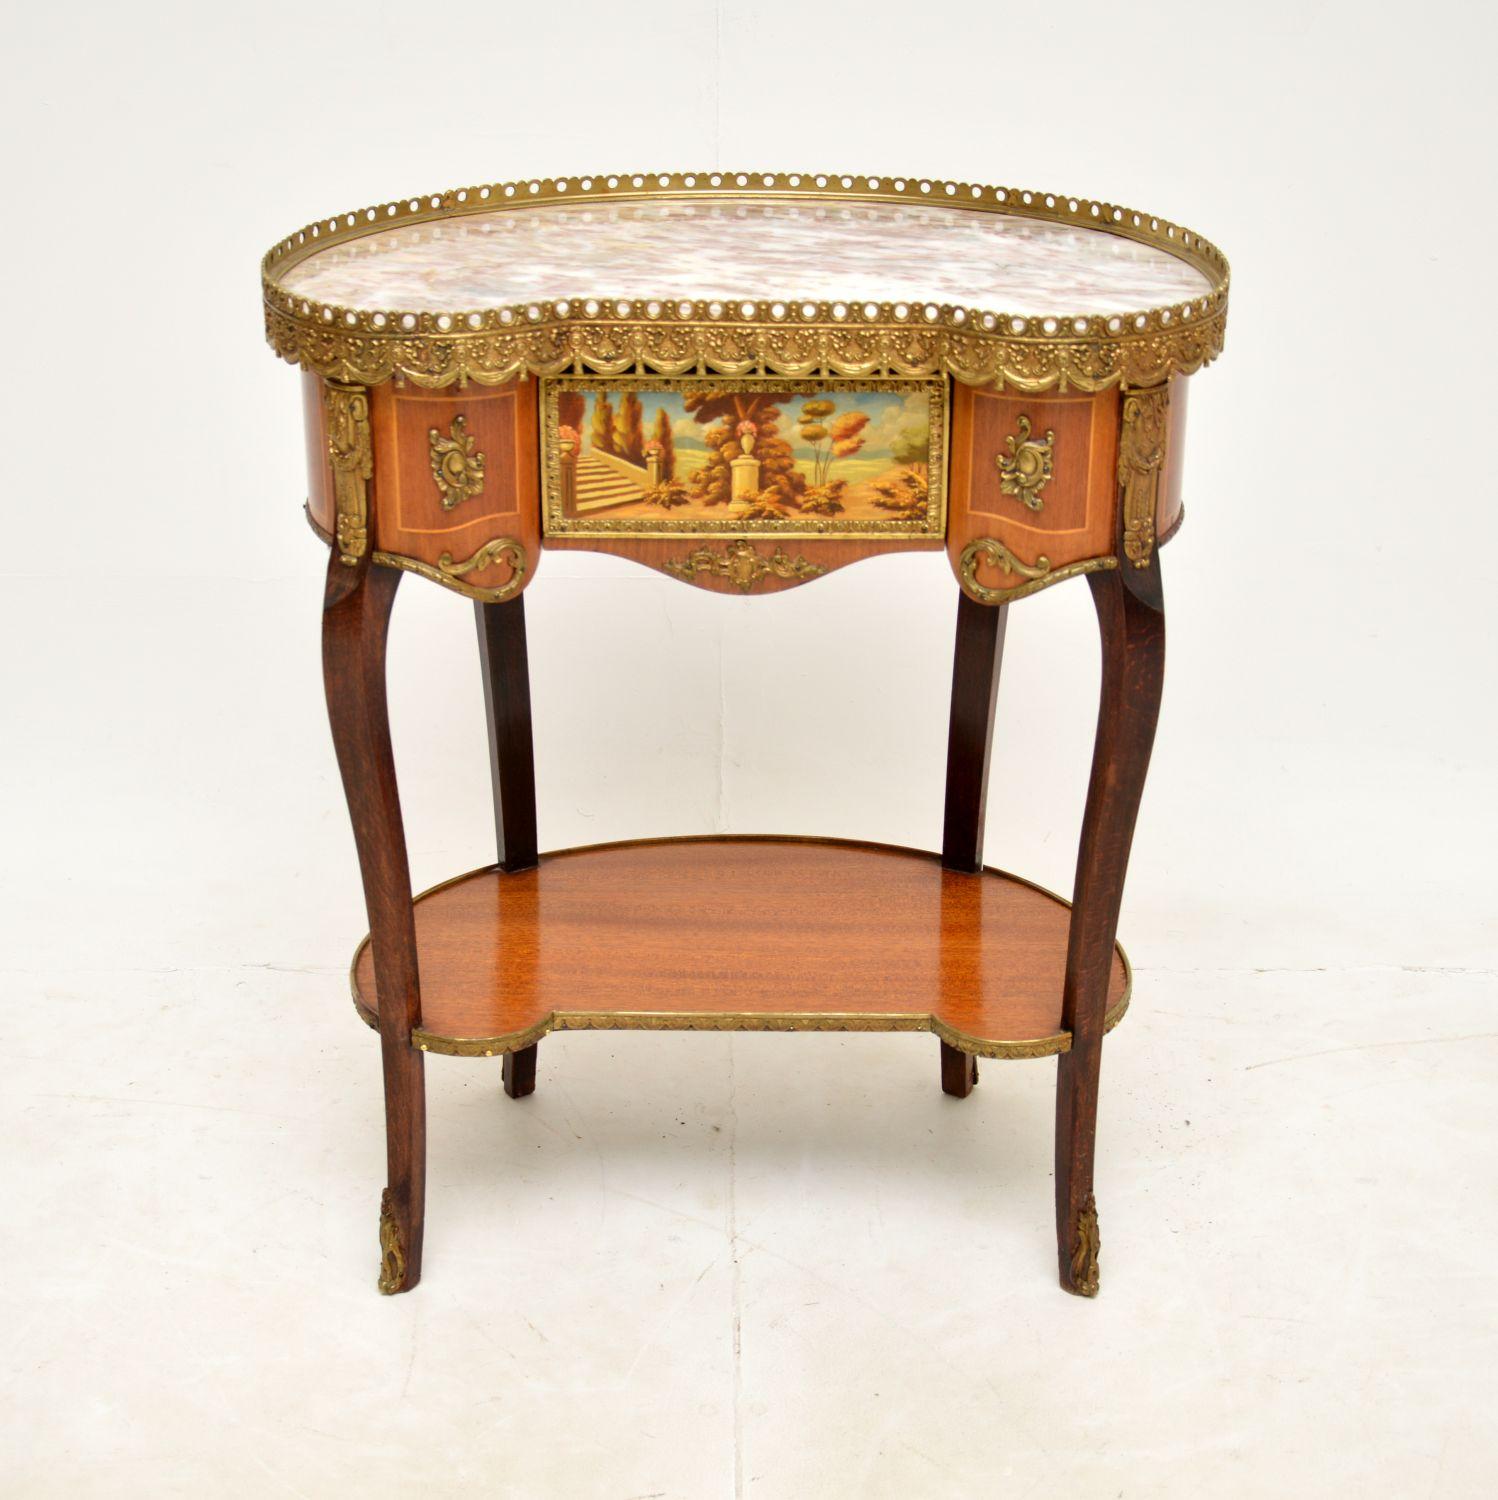 A beautiful antique French kidney shape side table with a marble top. This was made in France & dates from around the 1930s period.

It is of superb quality, with stunning gilt metal mounts and a pierced brass gallery around the marble top. There